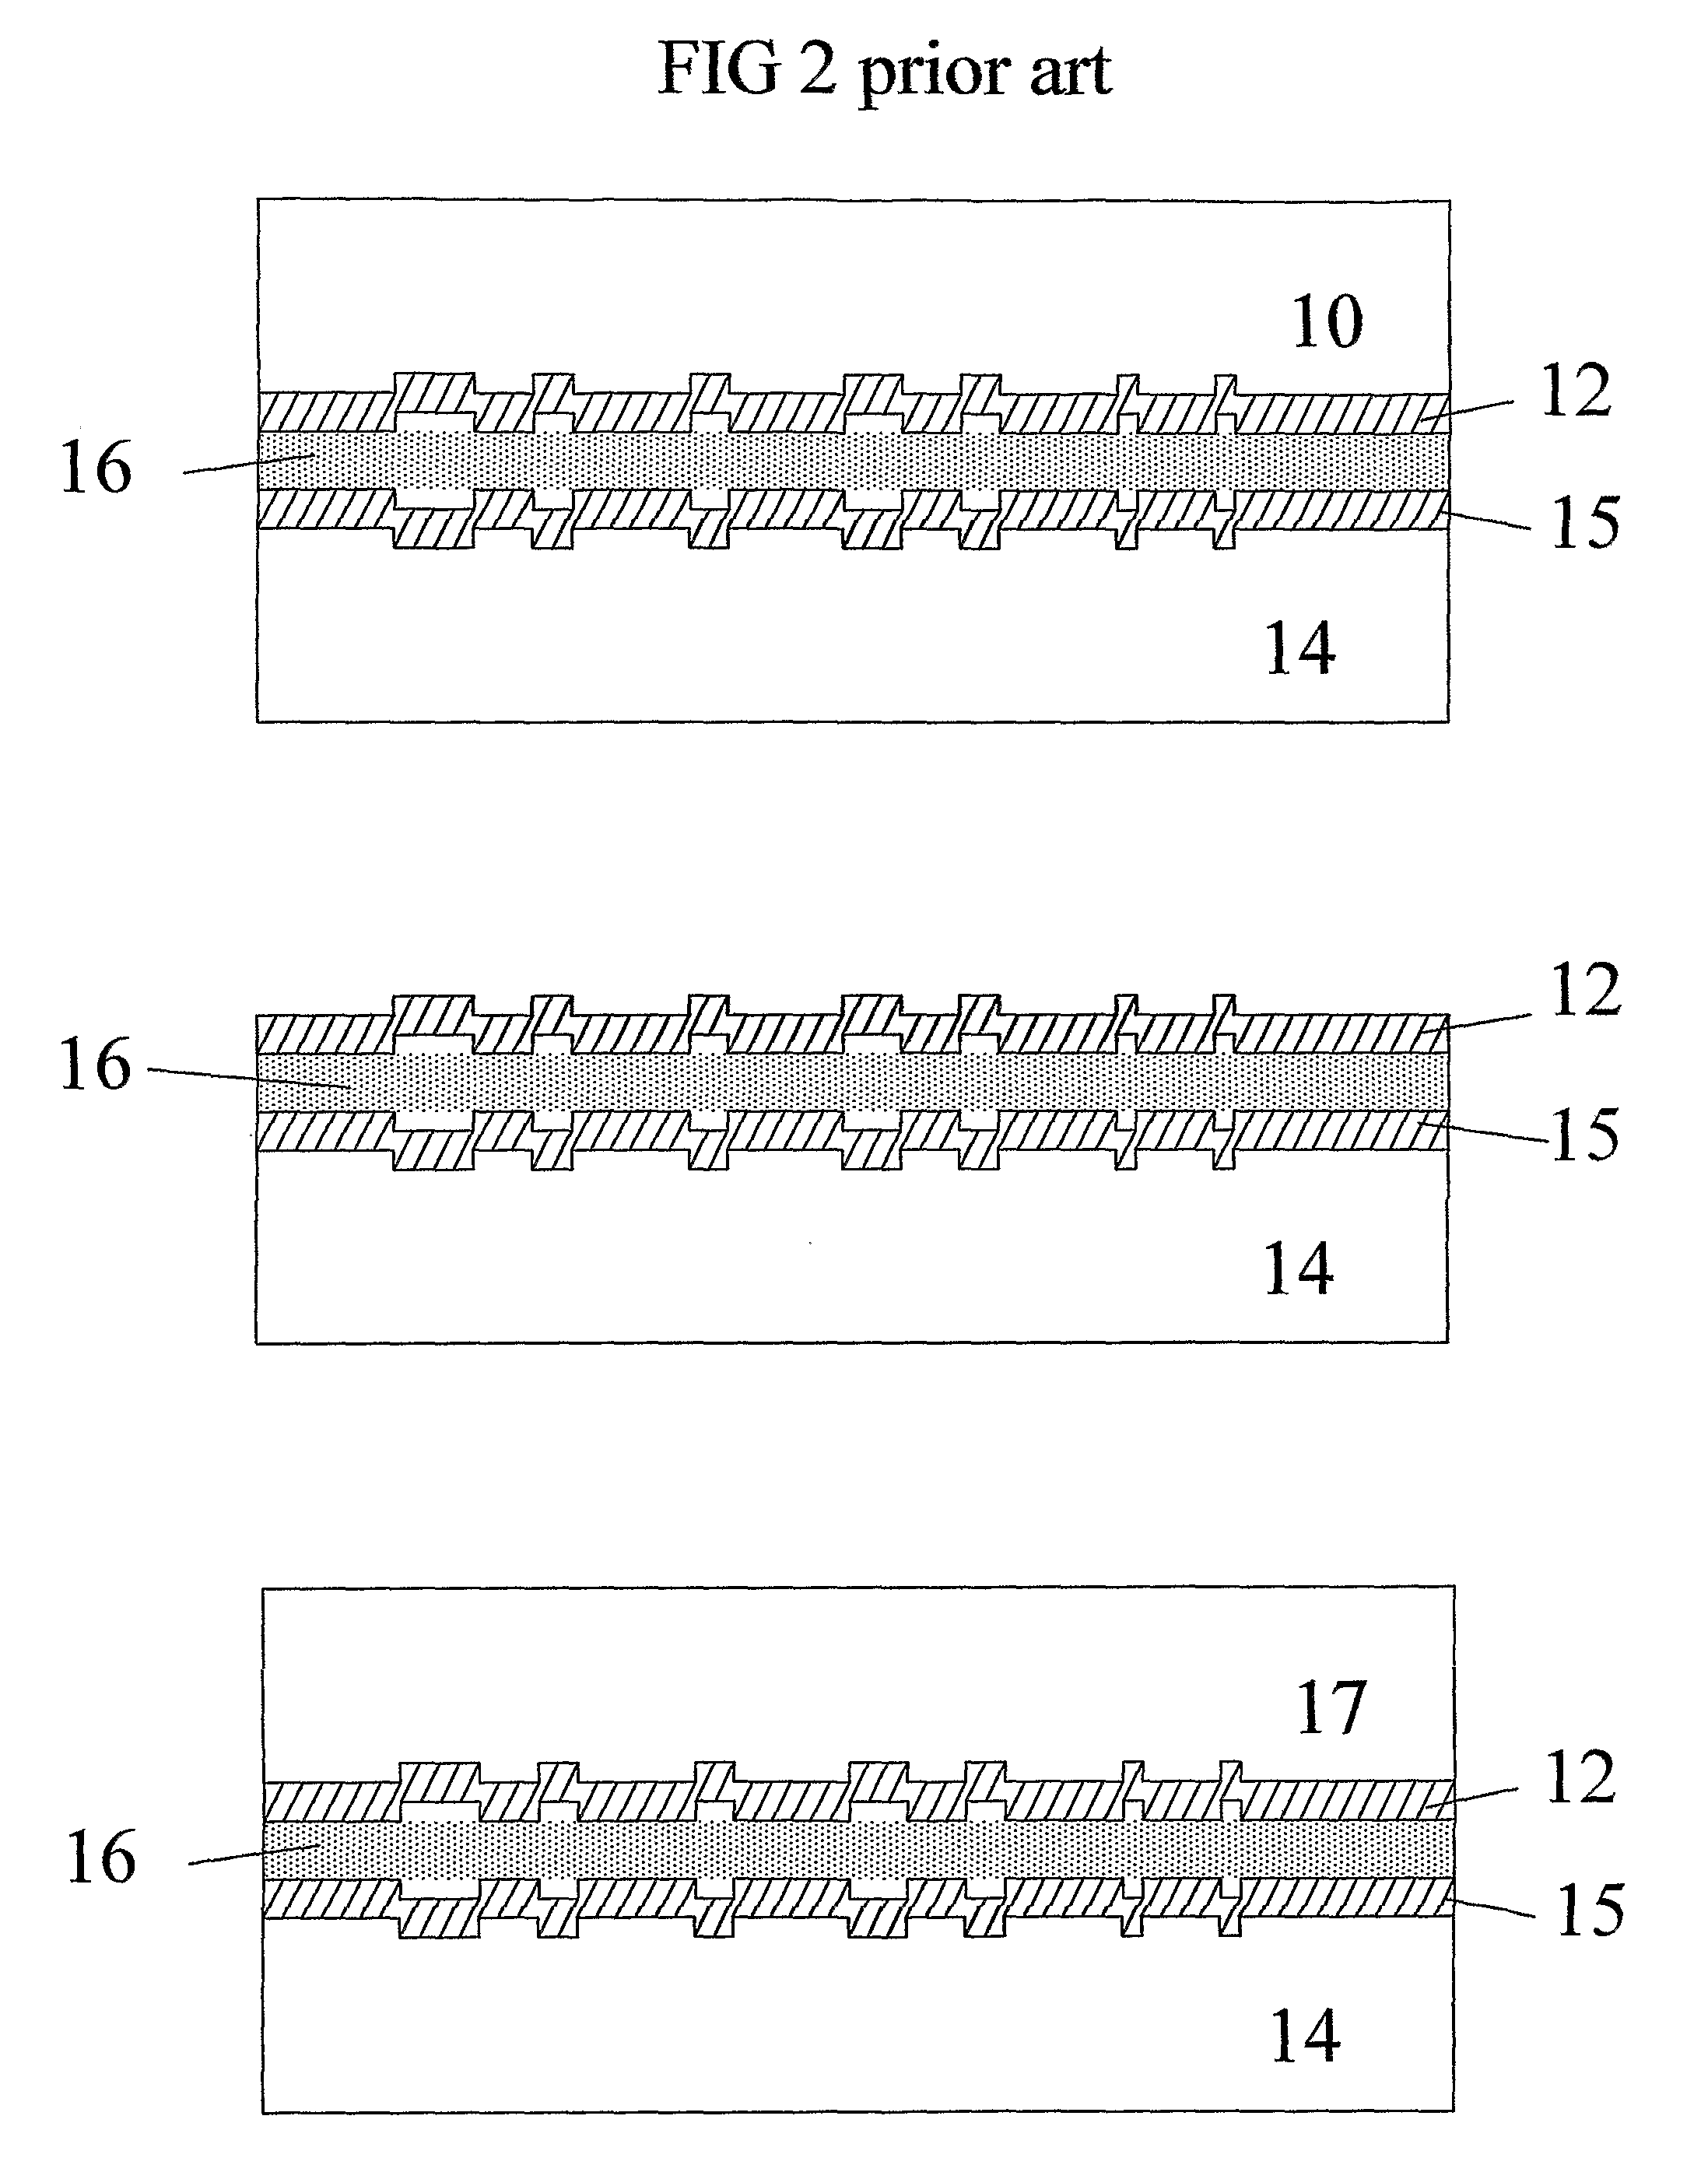 Multilayer Optical Disc and Method and Apparatus For Making Same